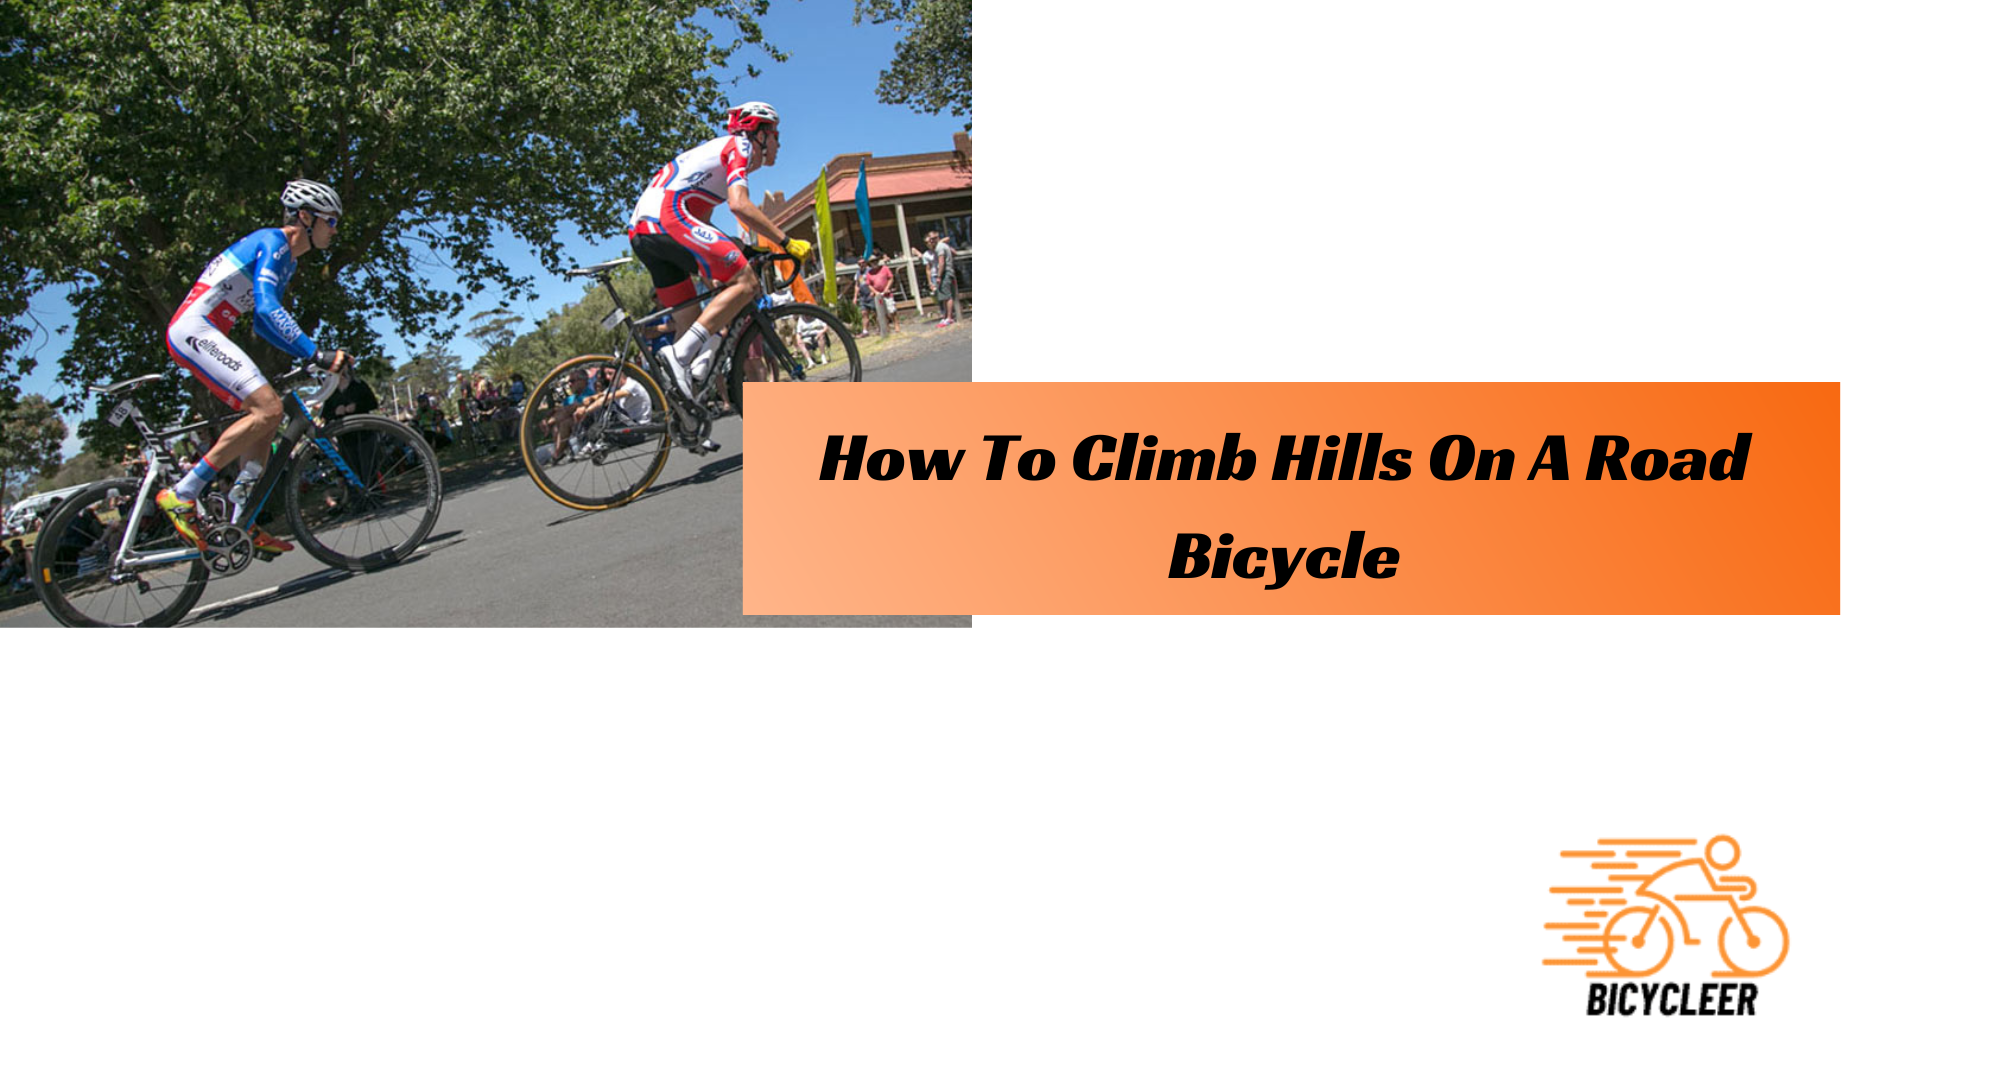 How To Climb Hills On A Road Bicycle